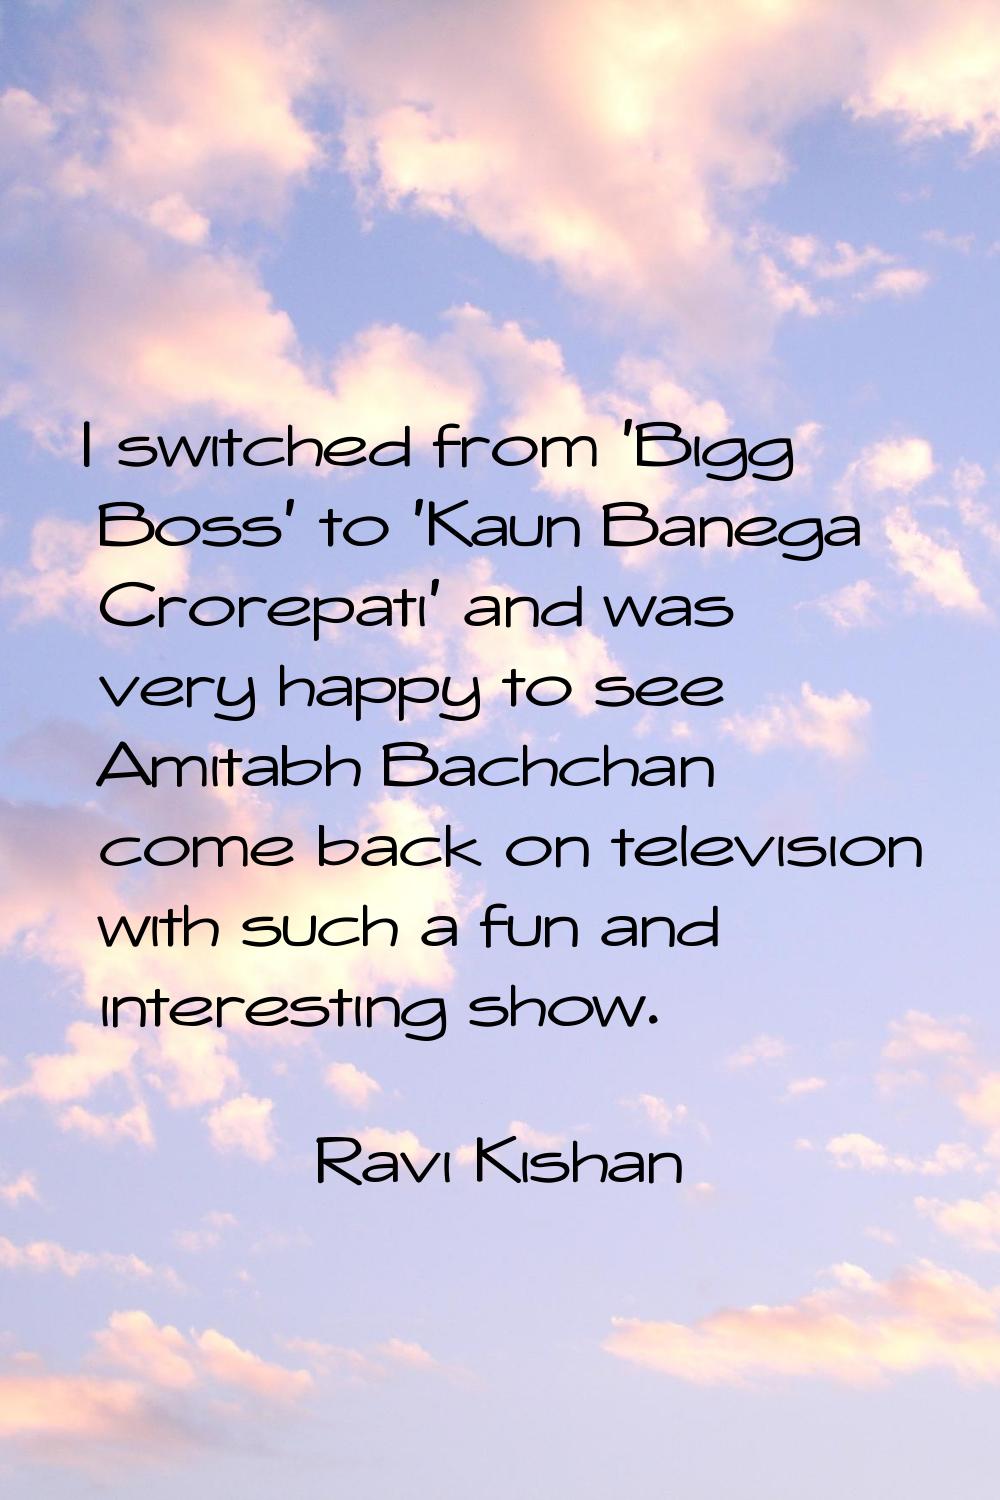 I switched from 'Bigg Boss' to 'Kaun Banega Crorepati' and was very happy to see Amitabh Bachchan c